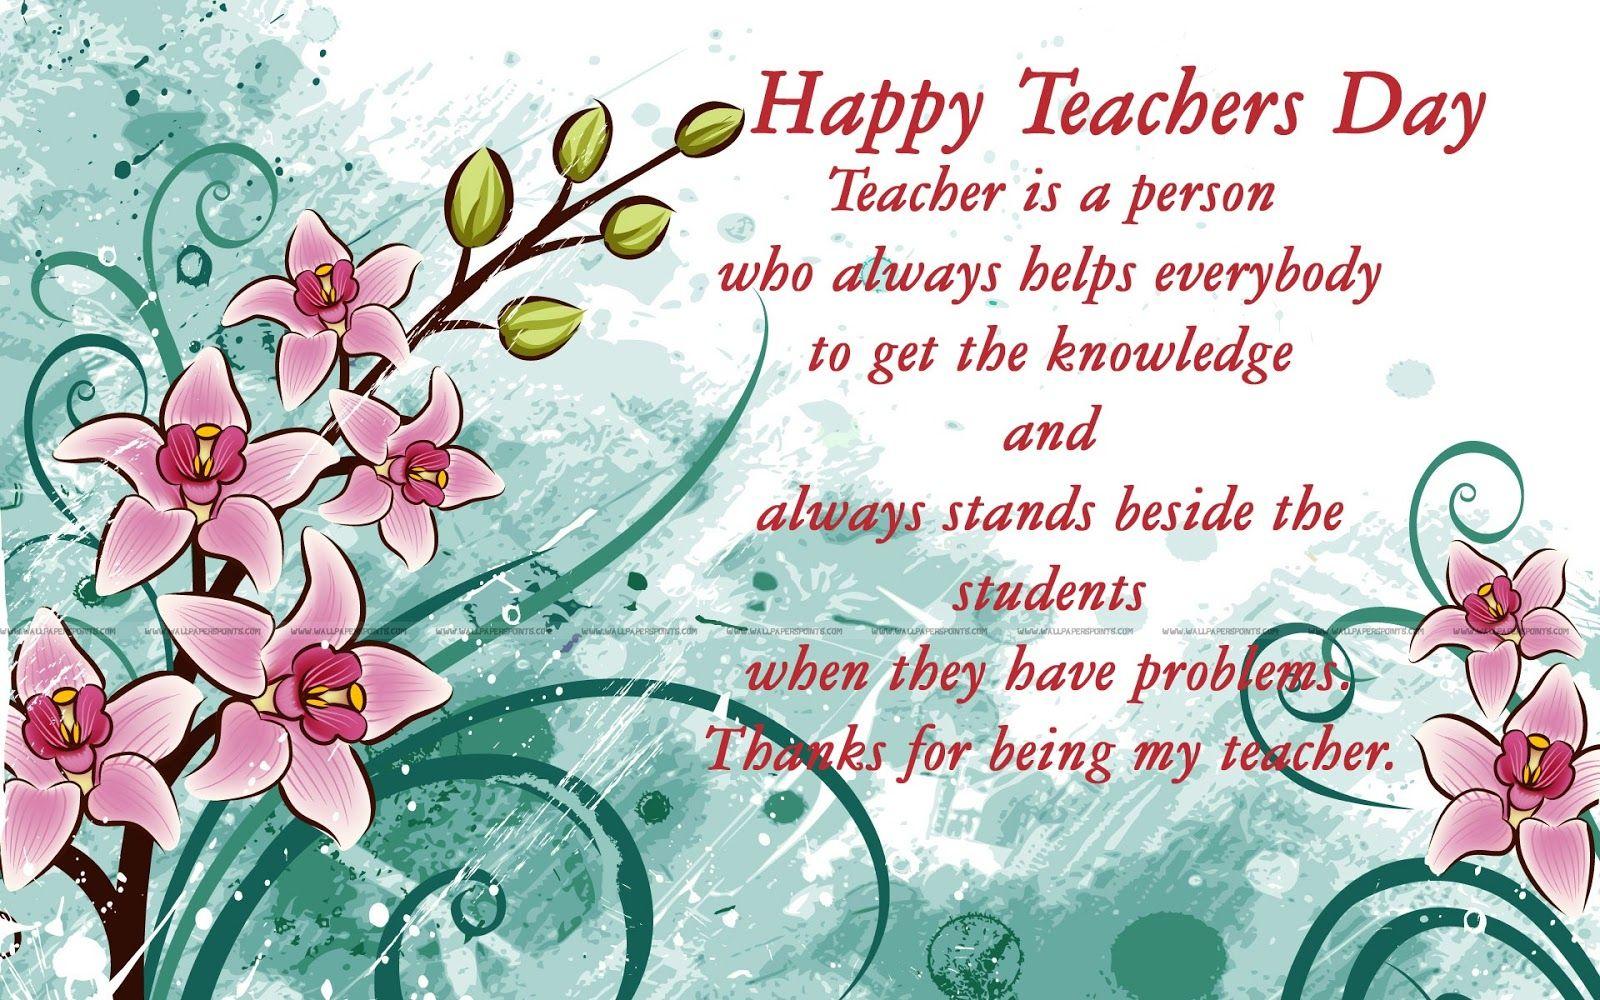 World teachers day 2016 Image HD Wallpaper Picture